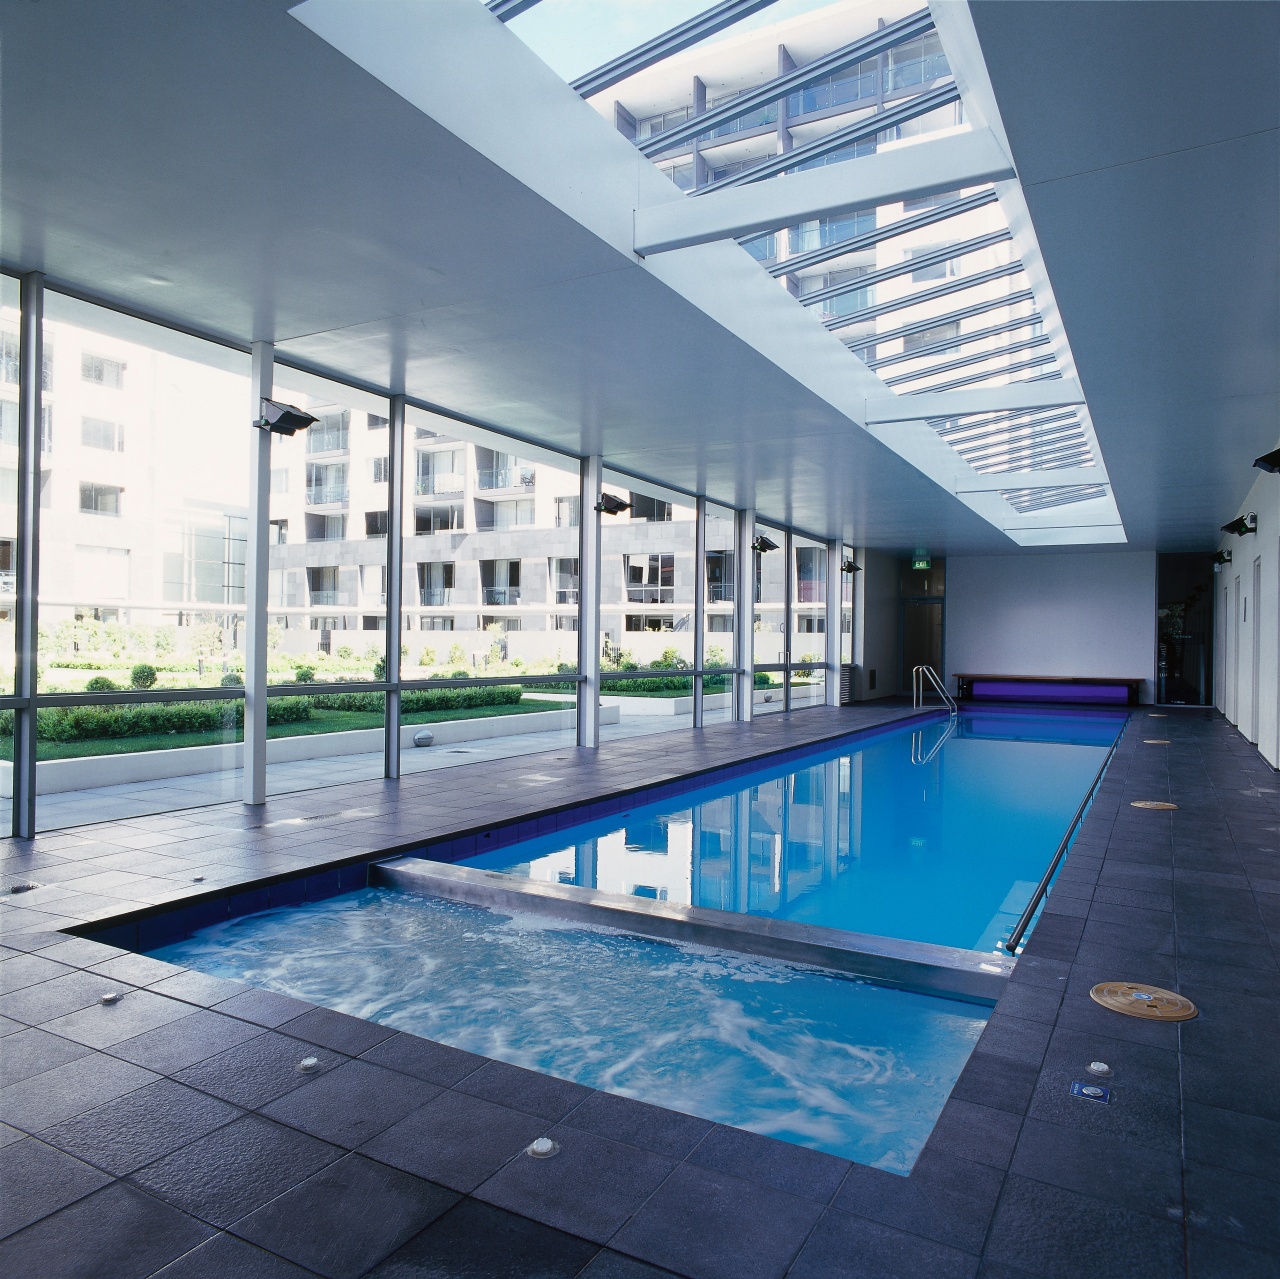 Indoor lap pool and spa with paved surround, apartment, architecture, condominium, corporate headquarters, daylighting, daytime, leisure, leisure centre, property, real estate, swimming pool, water, blue, gray